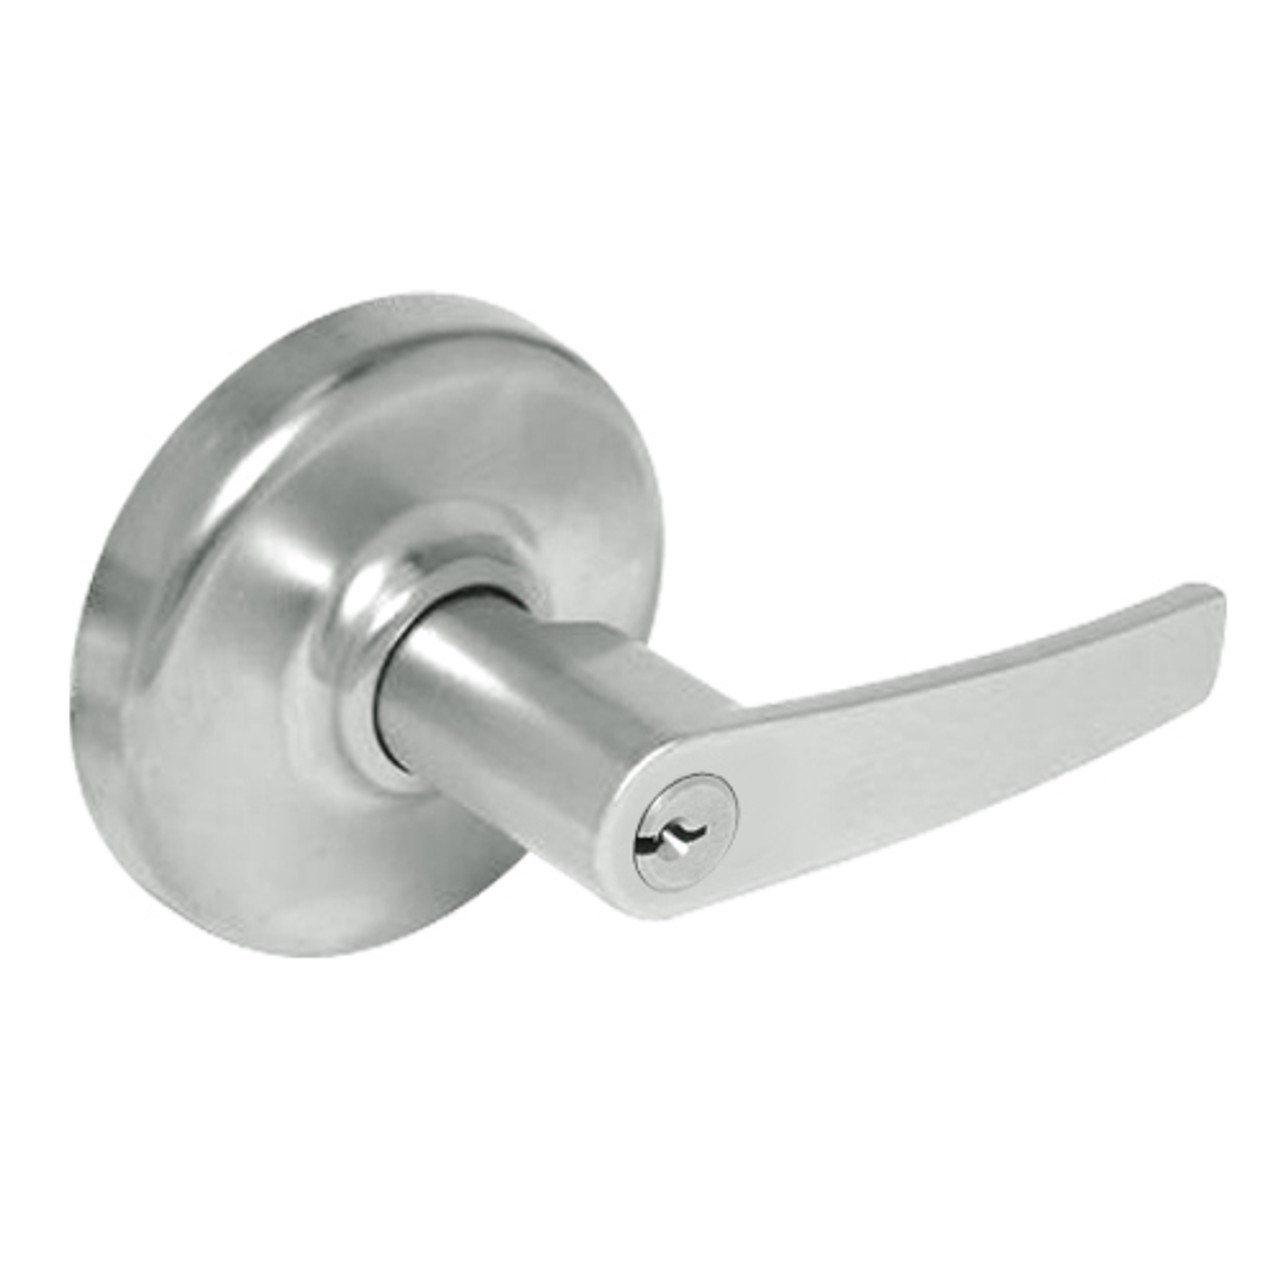 CL3361-AZD-618 Corbin CL3300 Series Extra Heavy Duty Entry or Office Cylindrical Locksets with Armstrong Lever in Bright Nickel Plated Finish